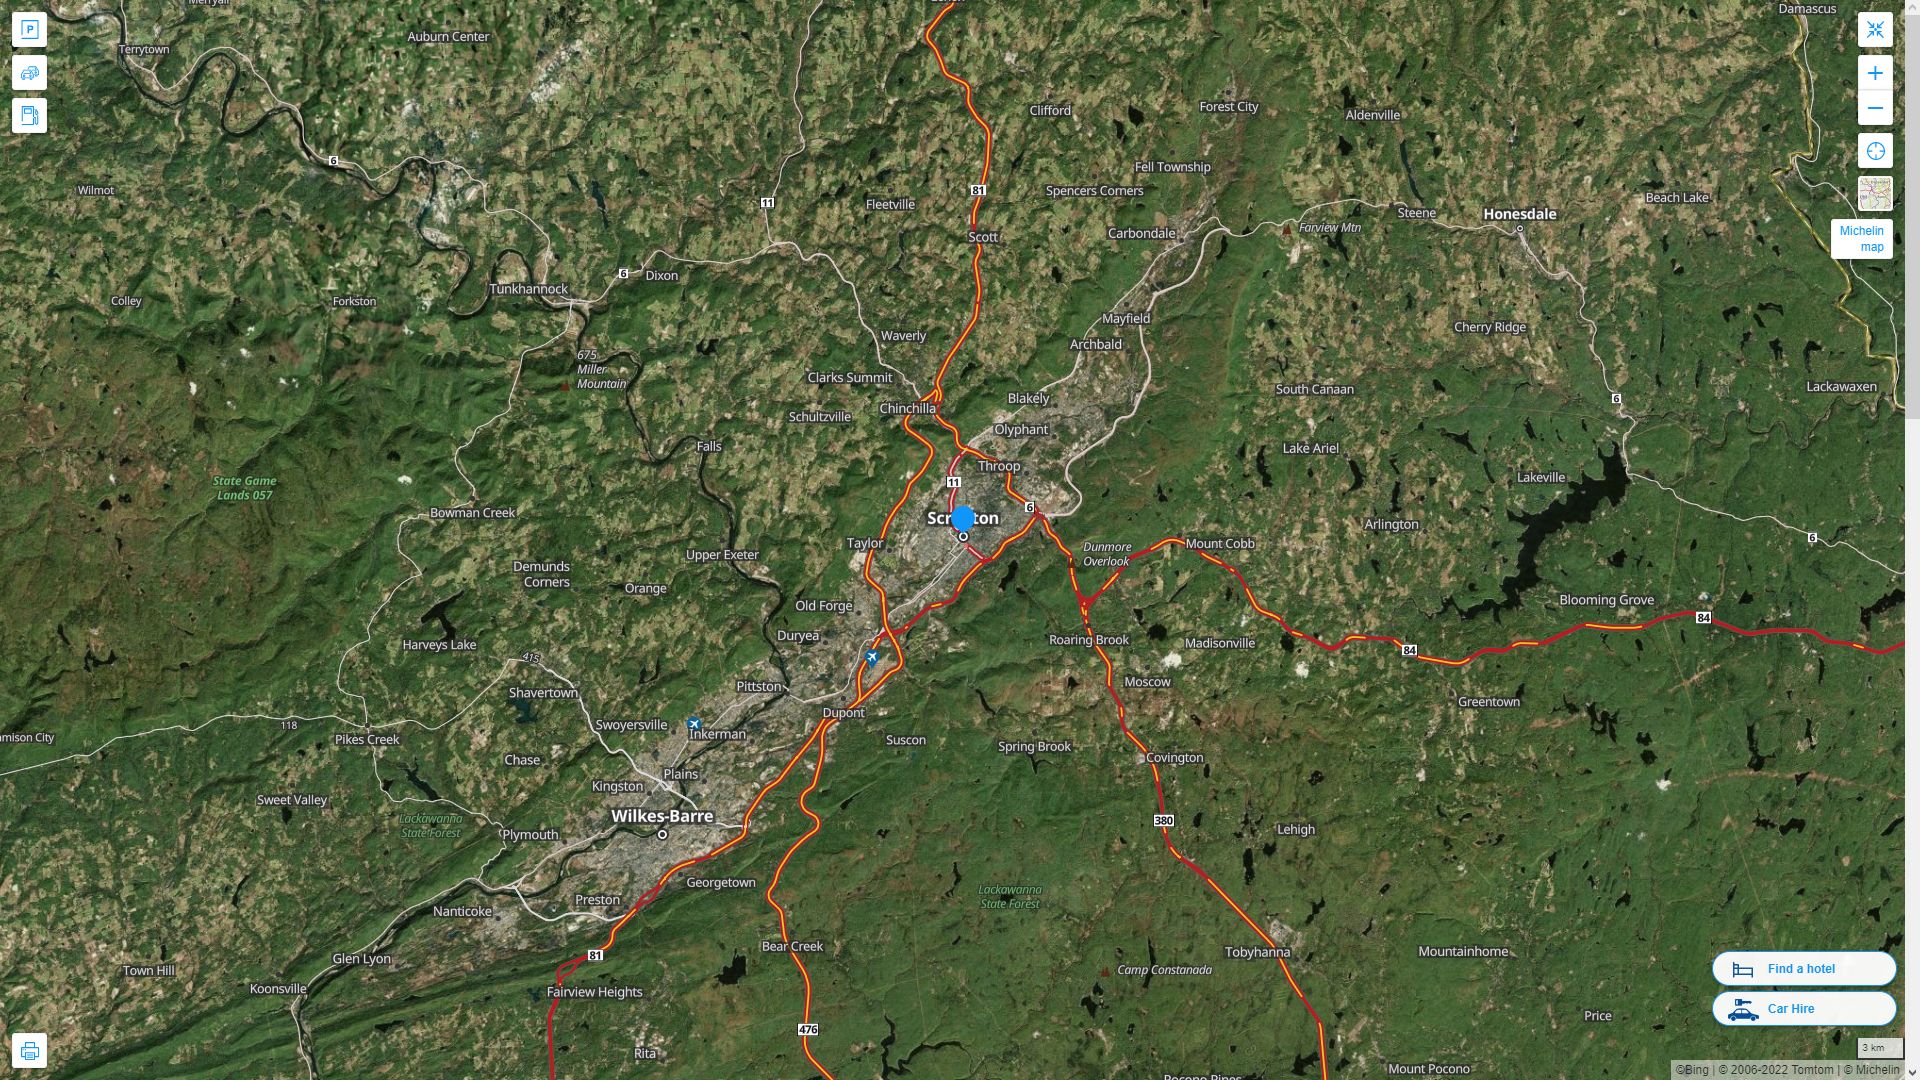 Scranton Pennsylvania Highway and Road Map with Satellite View